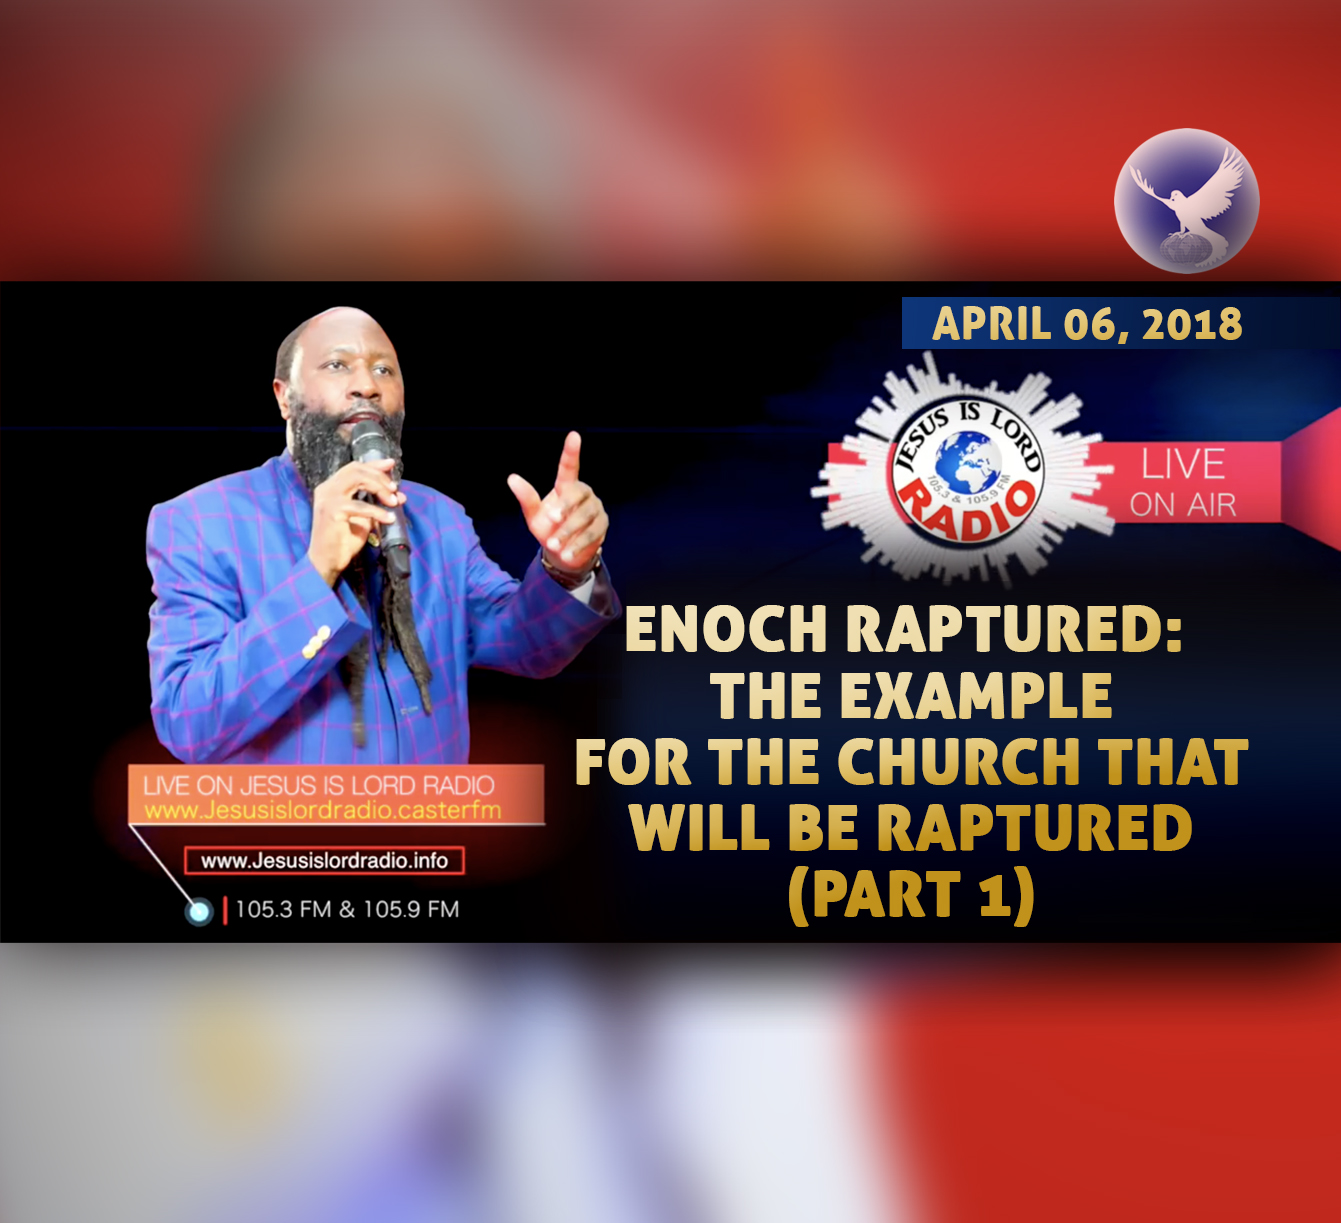 EPISODE 165 - Enoch Raptured: The Example For The Church That'll Be Raptuted Part 1 (06MAR2018) - Prophet Dr. Owuor